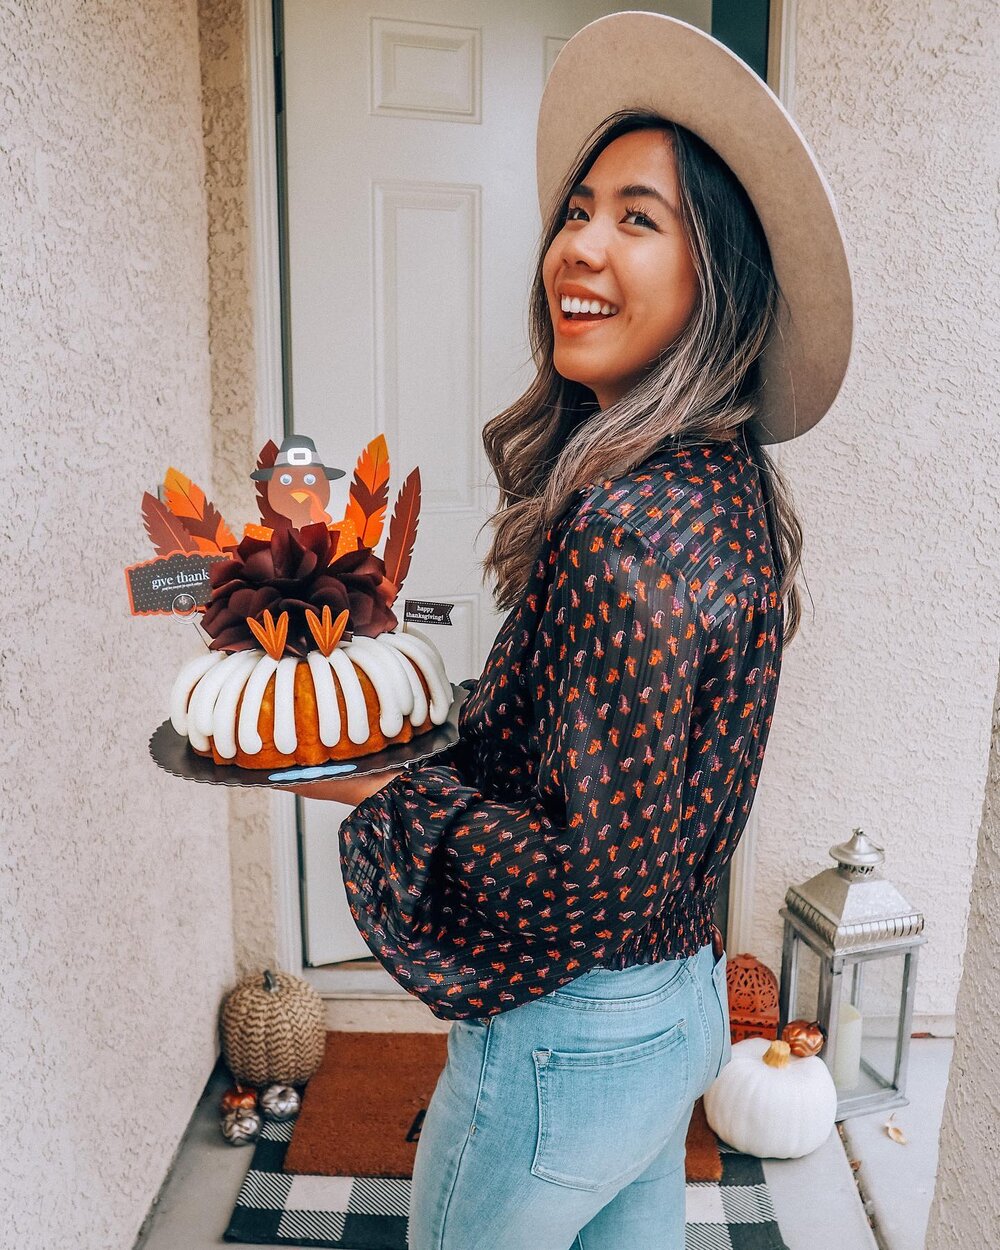 Let's bring more joy to 2020 and celebrate #NationalBundtDay on November 15! 🧡☺️ You can never go wrong with Nothing Bundt Cakes for a special occasion. That's why the NEW &quot;Give Thanks&quot; Decorated Bundt Cake in White Chocolate Raspberry wil